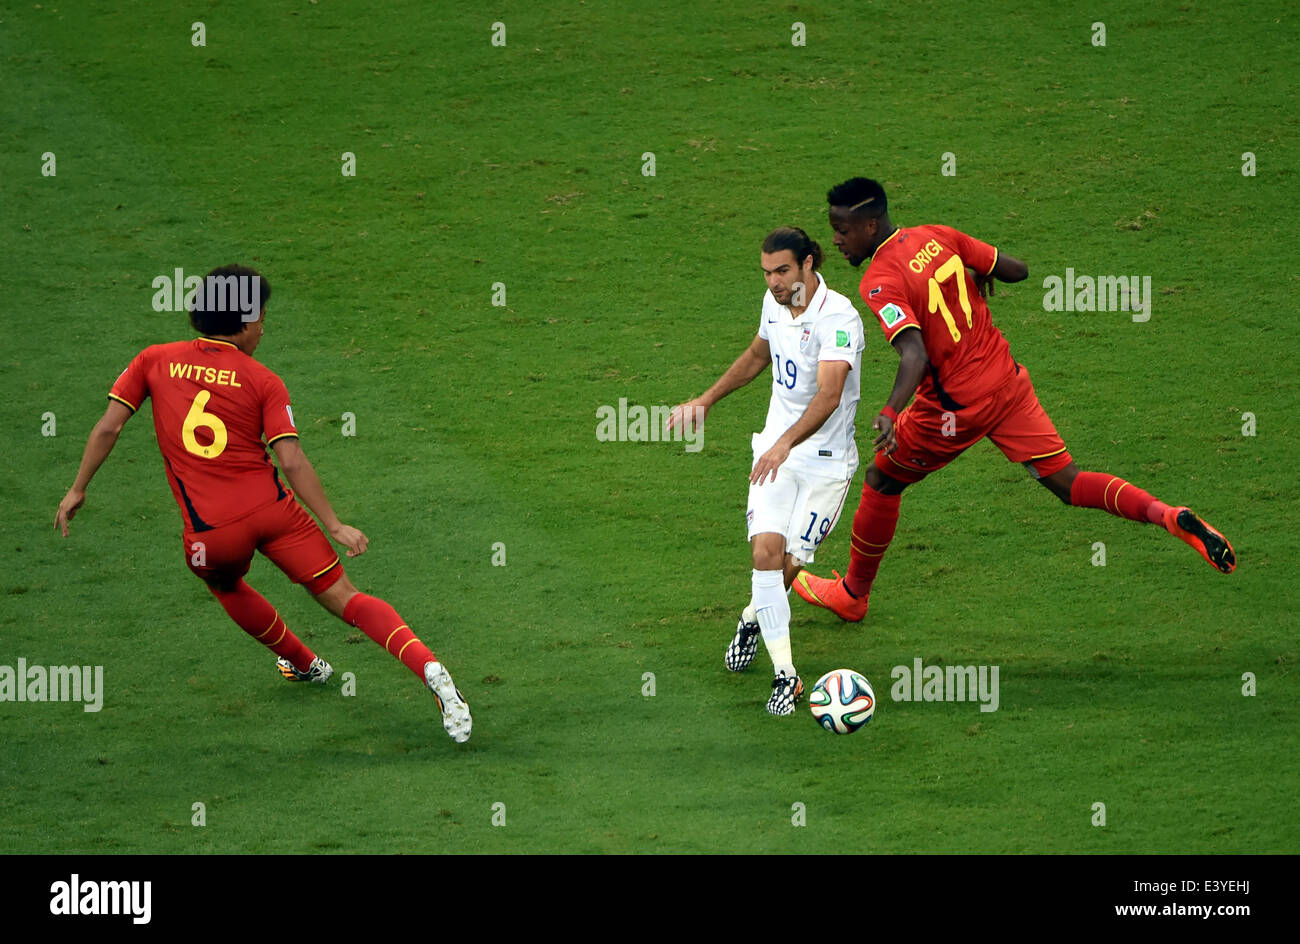 Salvador, Brazil. 1st July, 2014. Graham Zusi (C) of the U.S. vies with Belgium's Divock Origi (R) and Axel Witsel during a Round of 16 match between Belgium and the U.S. of 2014 FIFA World Cup at the Arena Fonte Nova Stadium in Salvador, Brazil, on July 1, 2014. Credit:  Guo Yong/Xinhua/Alamy Live News Stock Photo